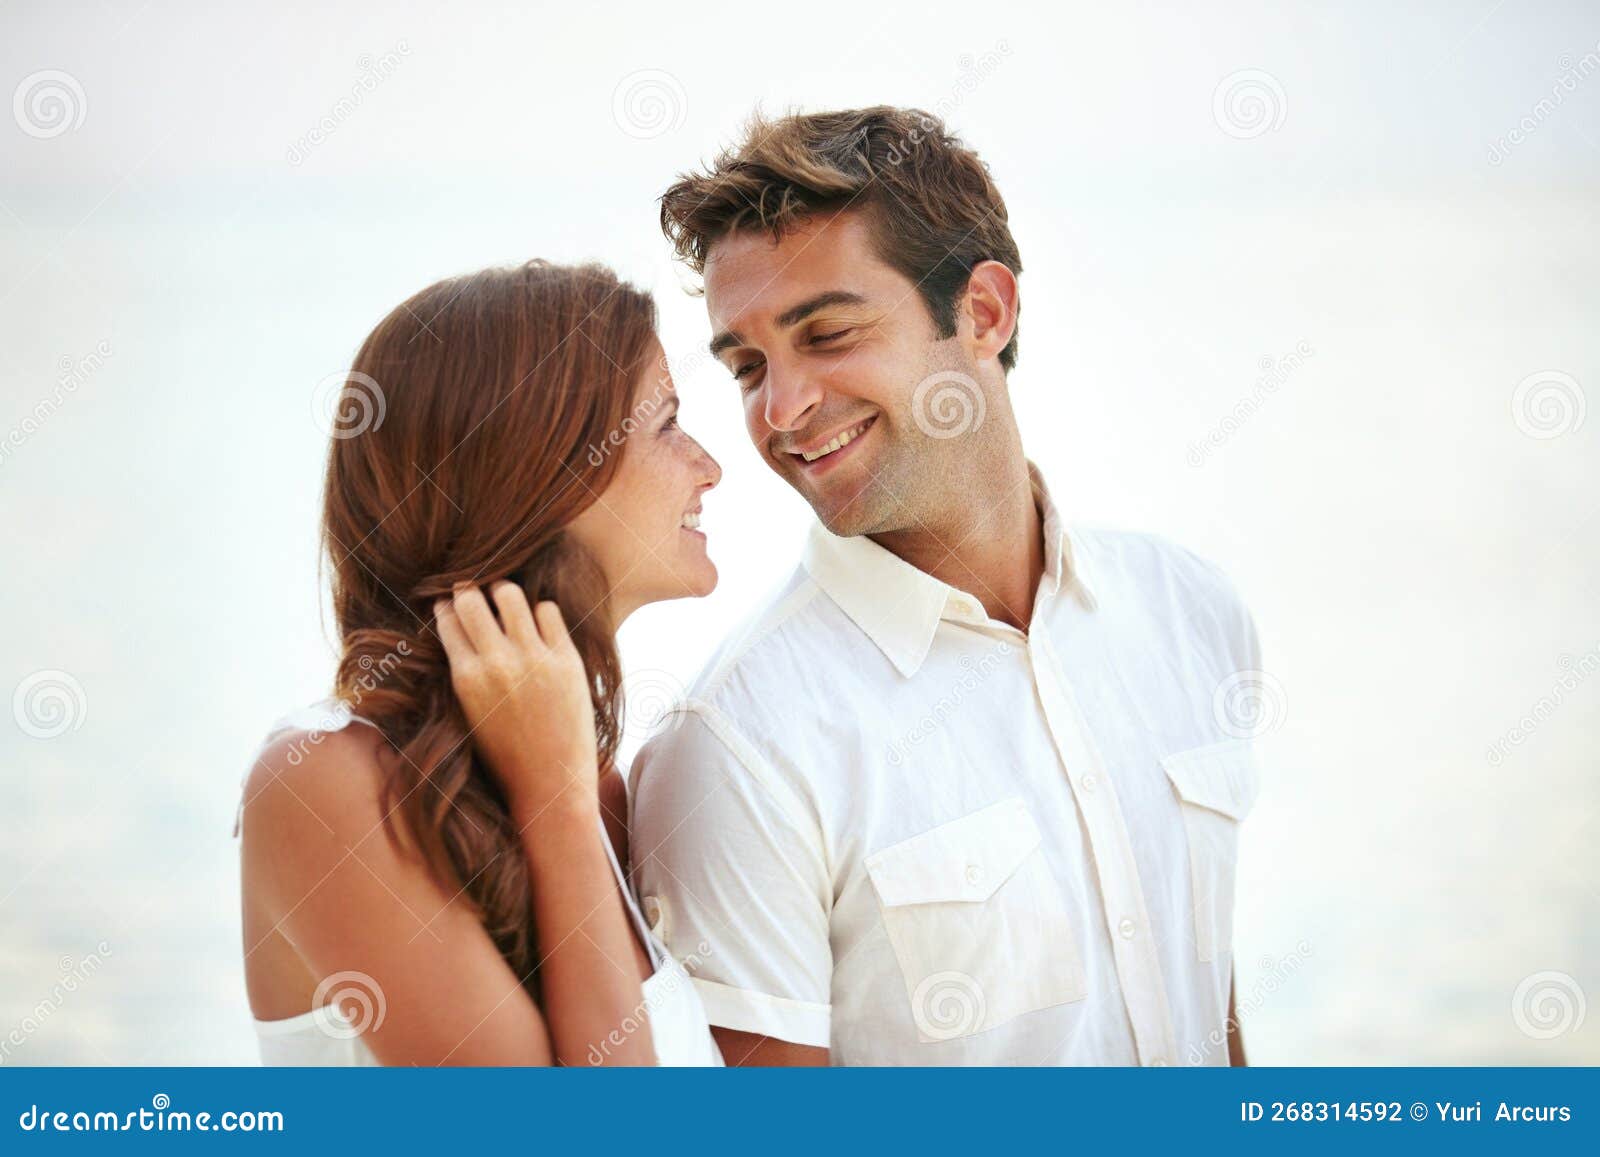 Sharing A Tender Moment A Loving Young Couple Gaze Into One Anothers Eyes During A Romantic